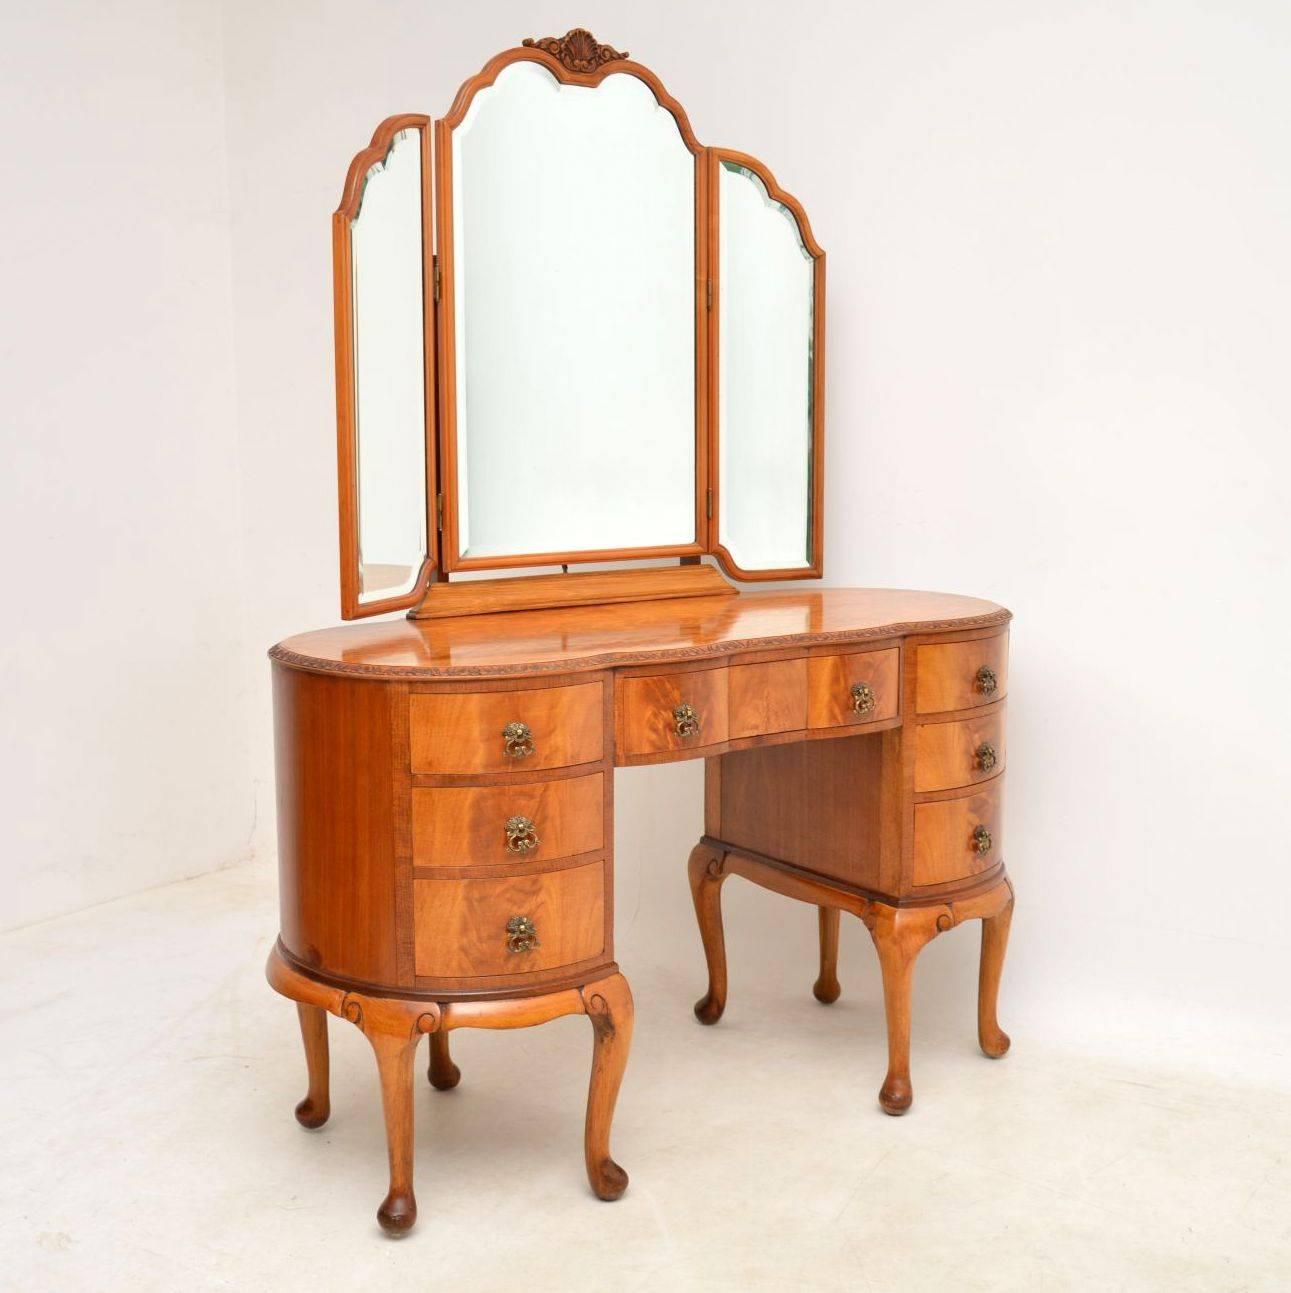 Very impressive antique flame mahogany dressing table, complete with the original fully adjustable bevelled mirrors. These kneehole dressing tables are becoming very hard to find these days, because the majority have been turned into desks. This